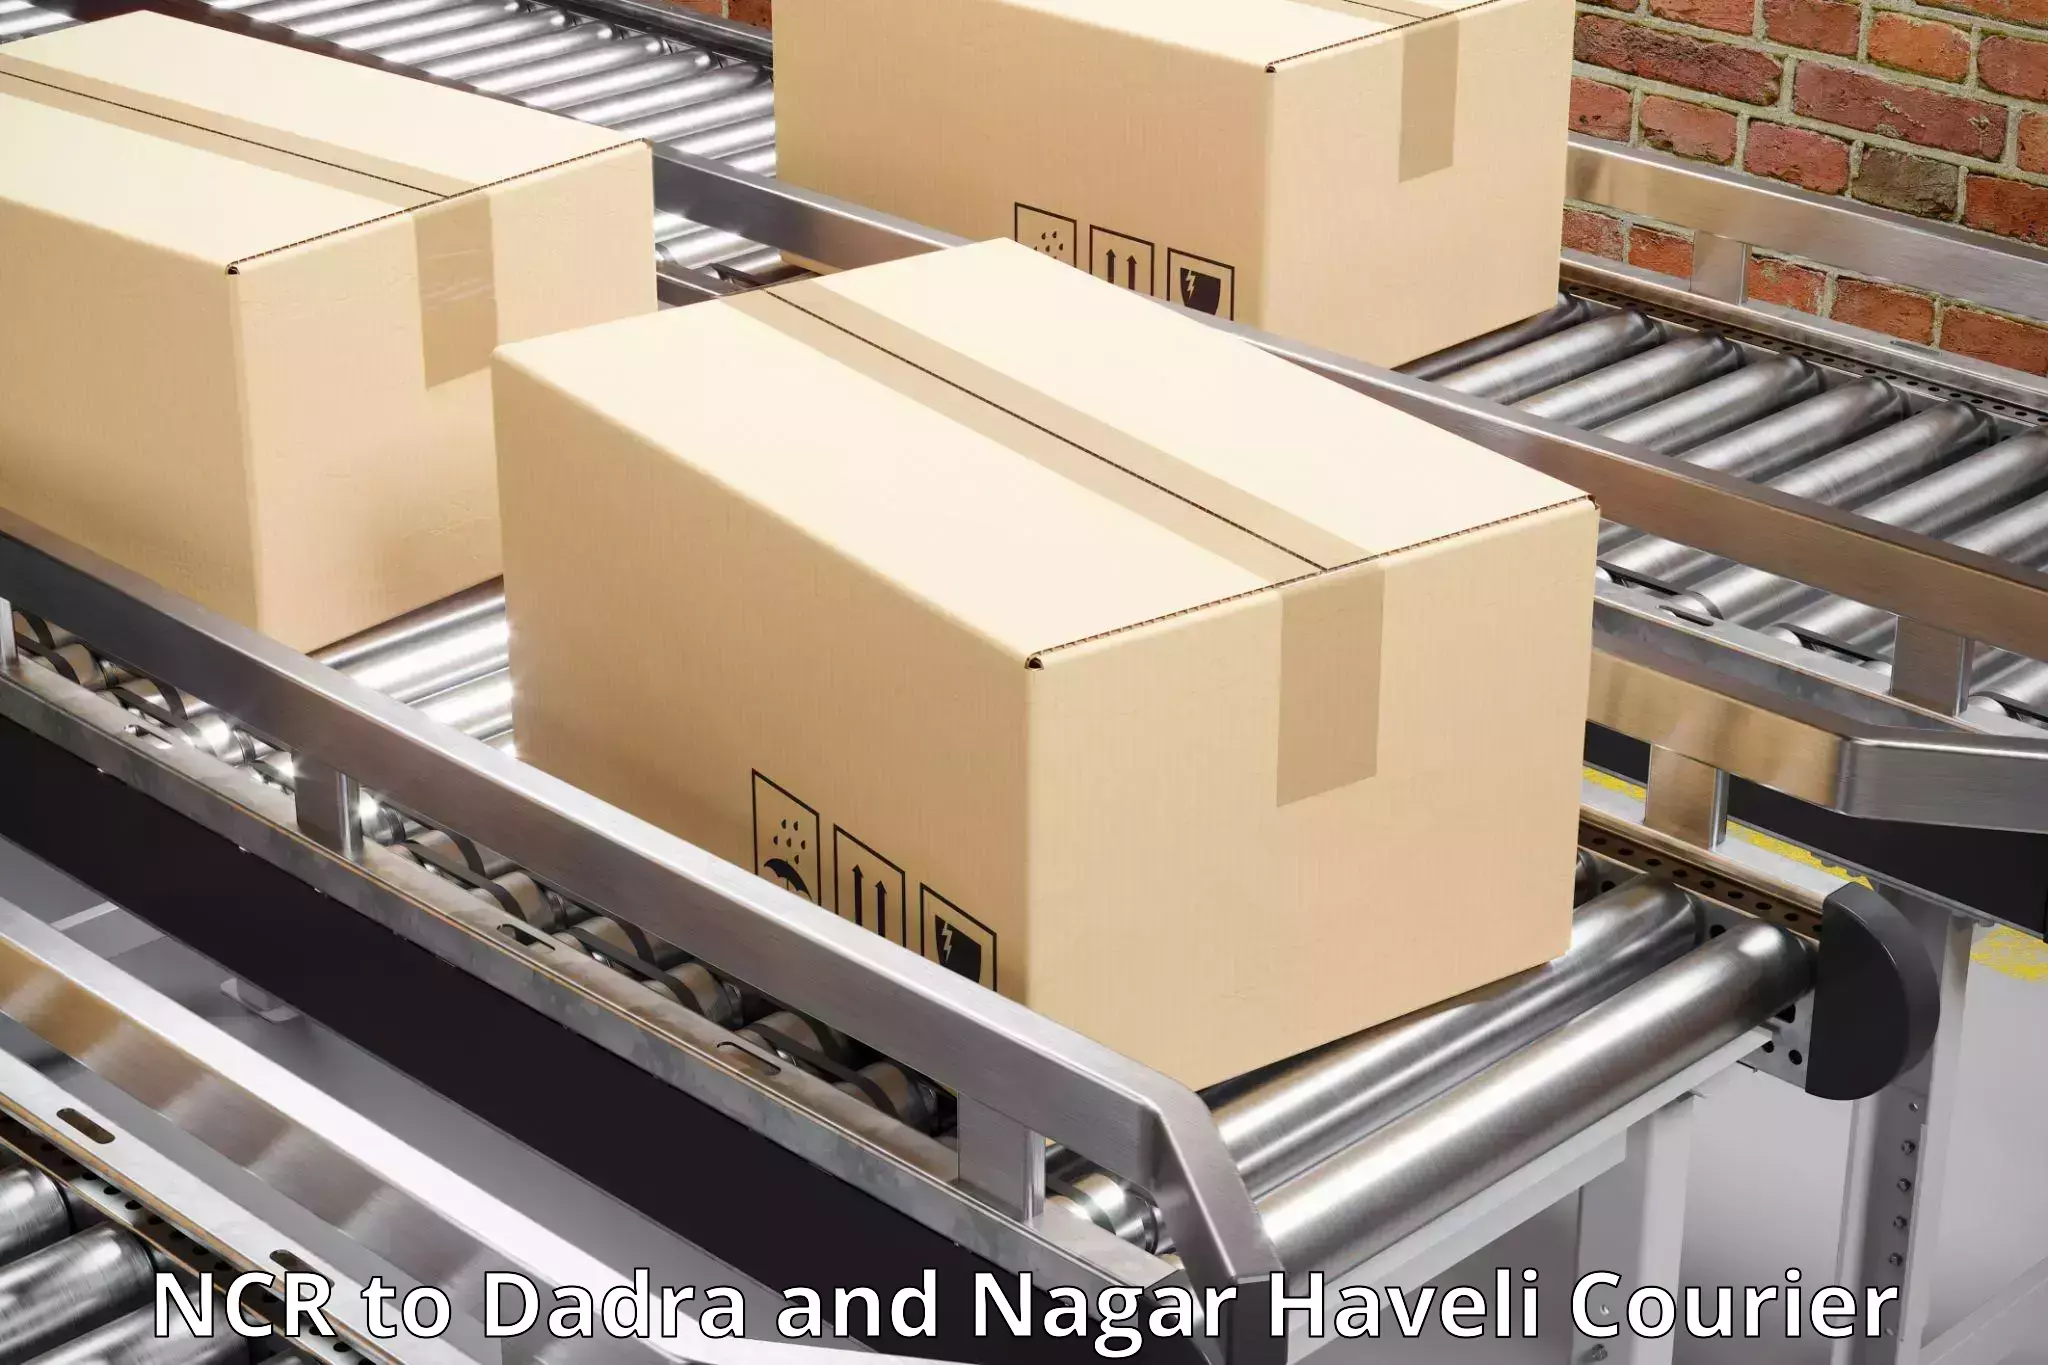 Automated parcel services NCR to Silvassa